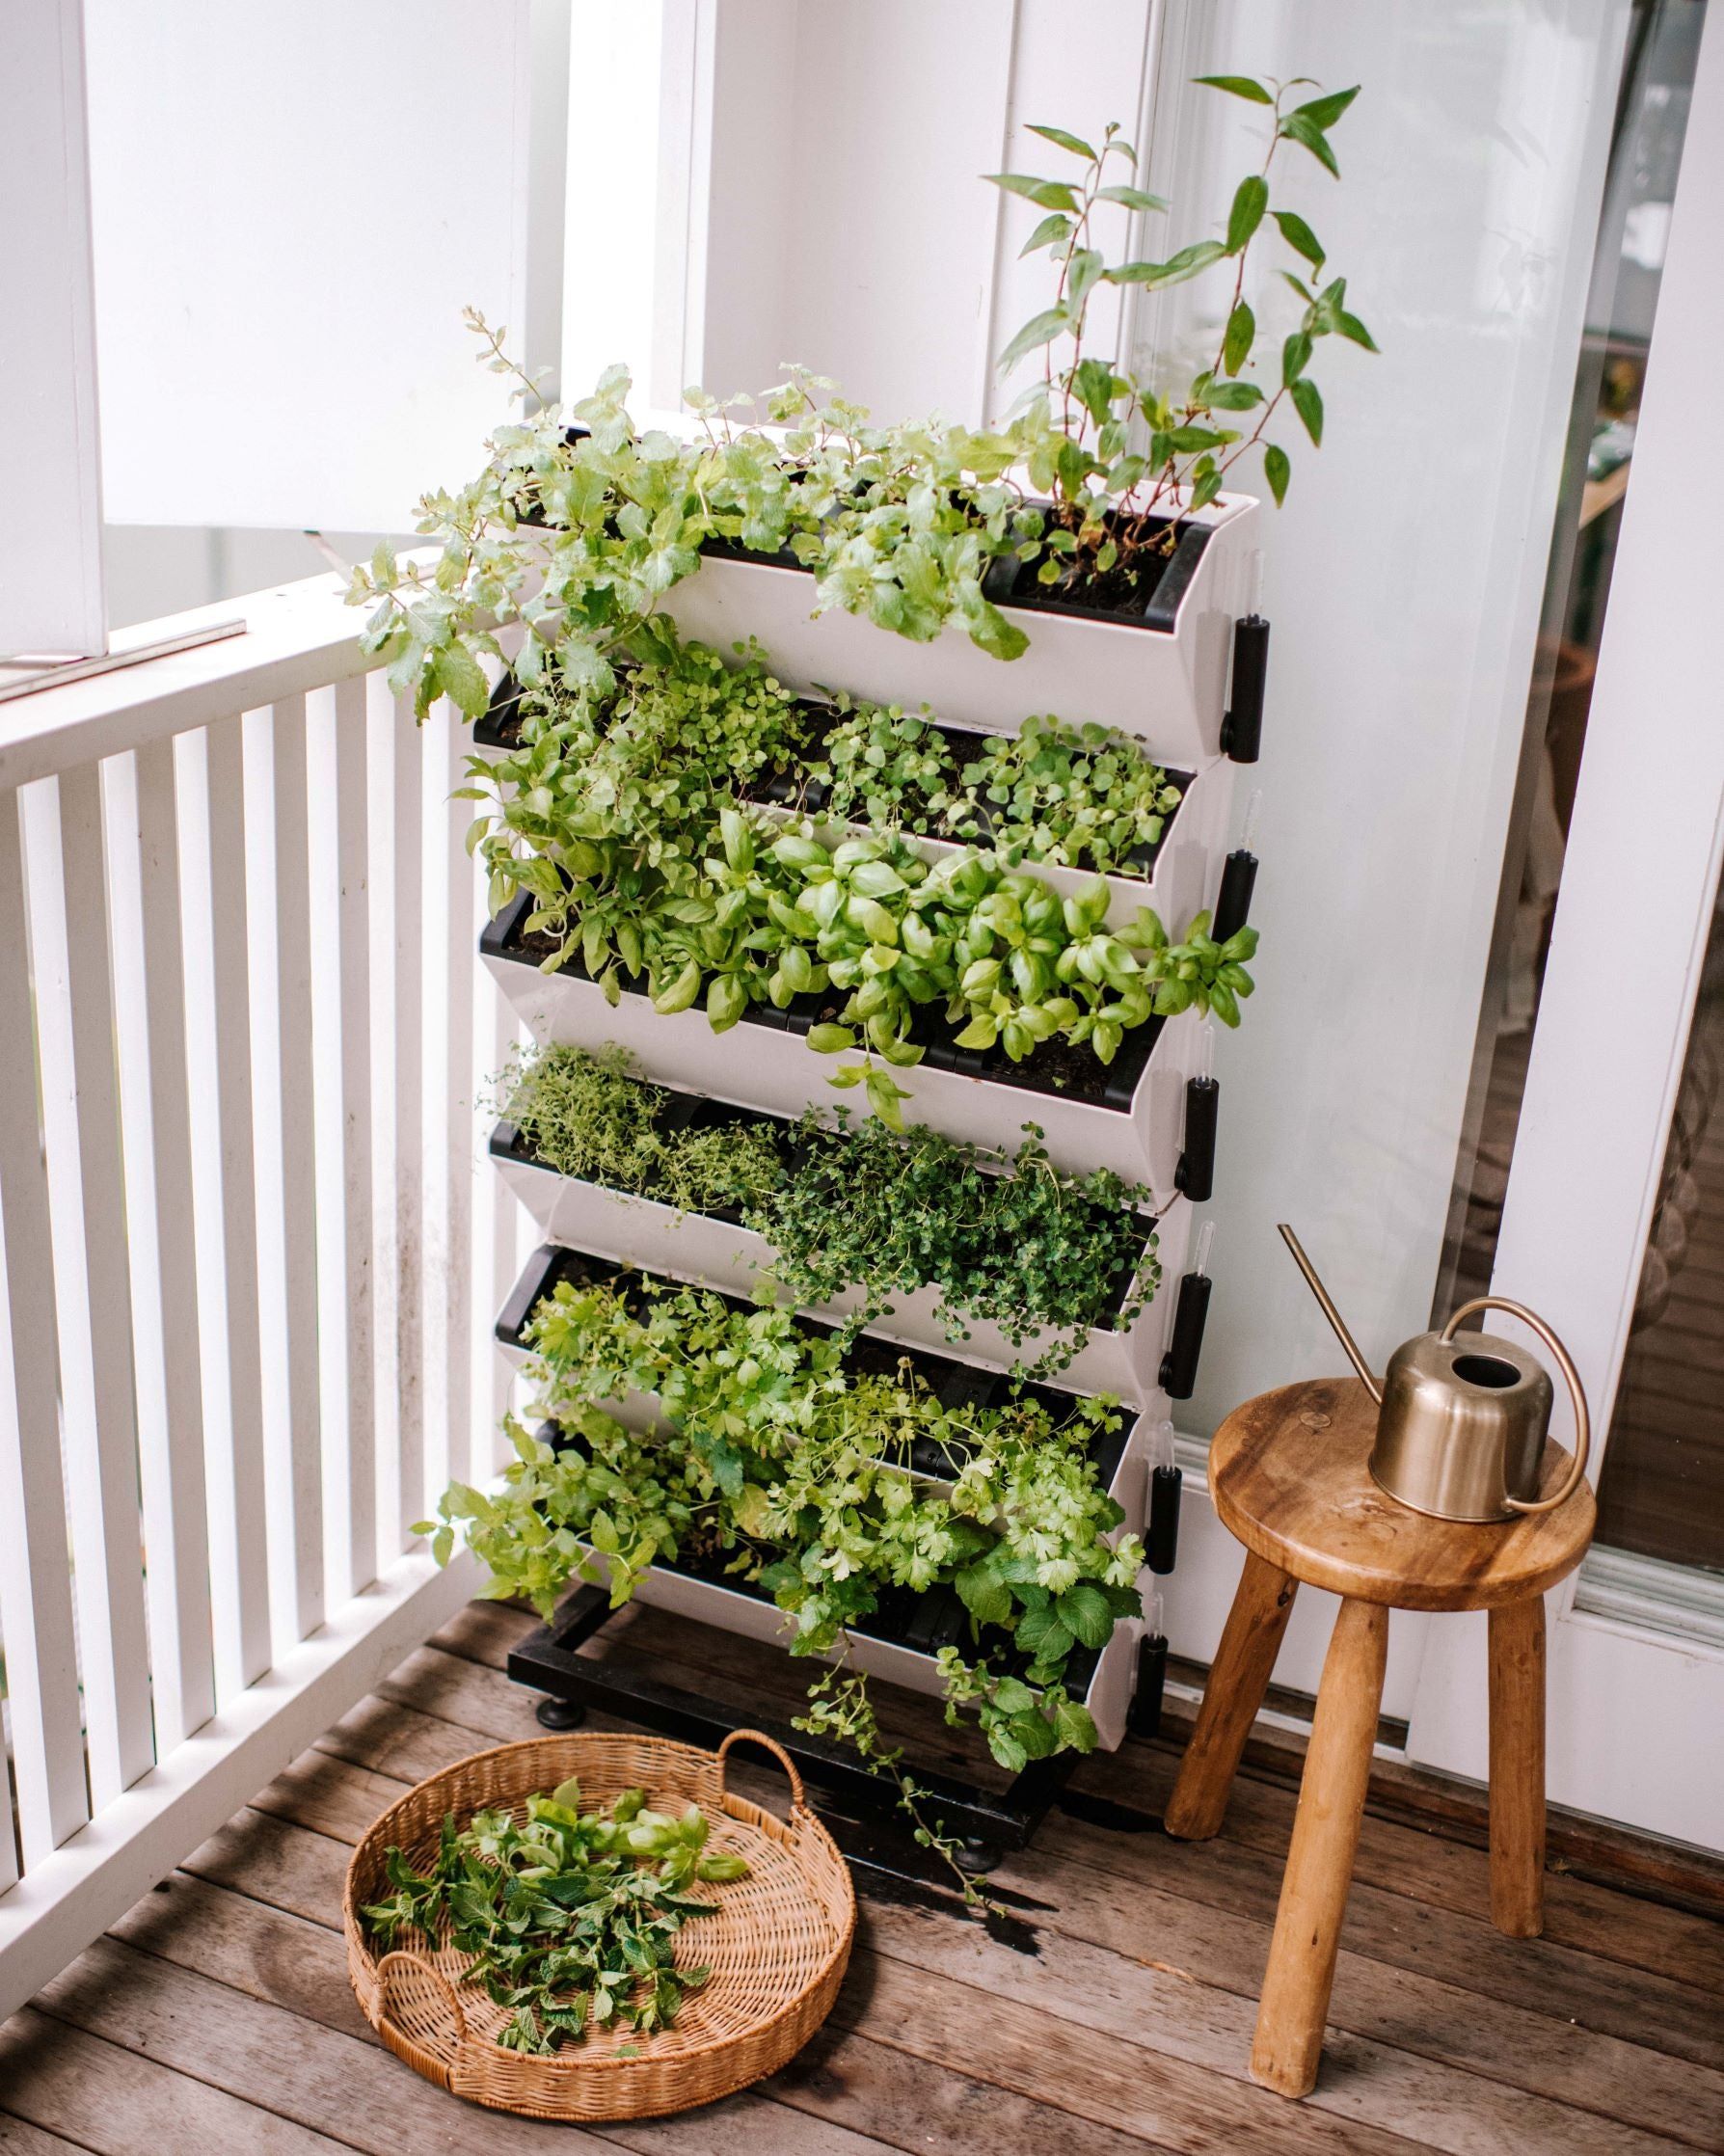 Growing Up: The Beauty and Benefits of Vertical Gardens